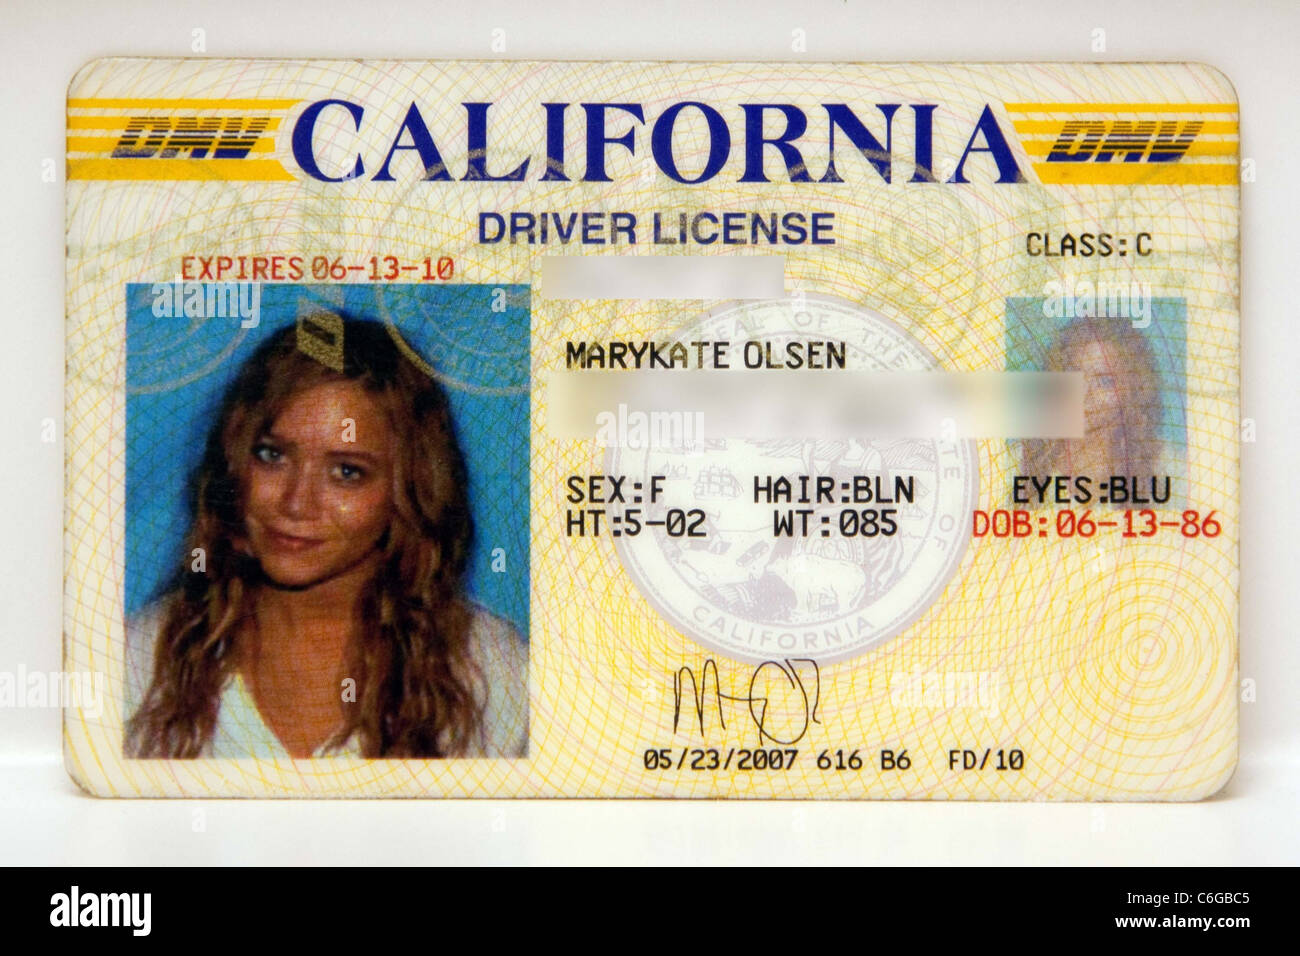 Mary-Kate Olsen is dangerously underweight, according to the information given on her driver's license. has acquired a copy of Stock Photo